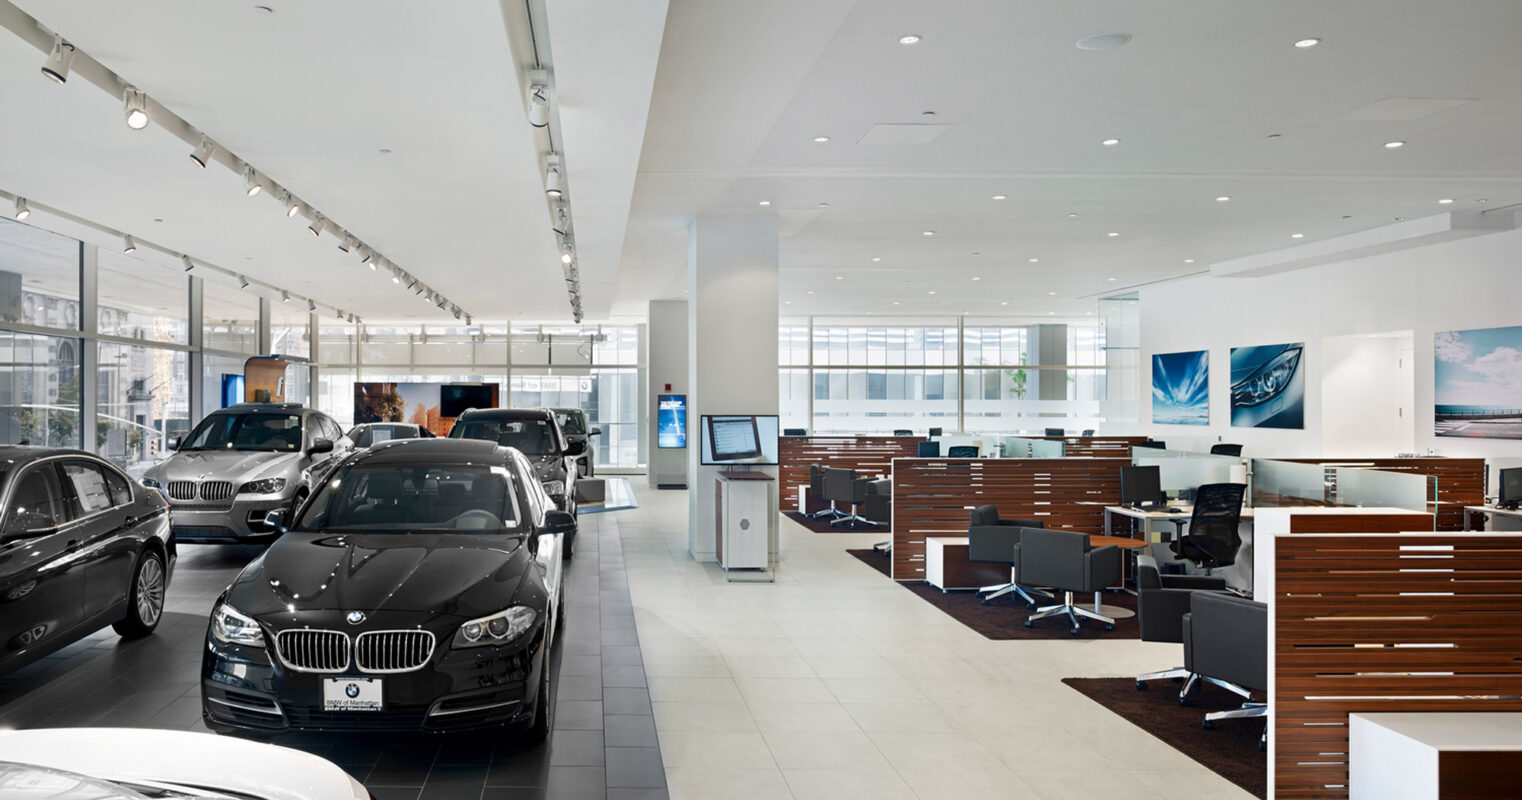 Spacious car showroom featuring sleek, modern design with white flooring and ceiling, ample natural light, and rows of high-end vehicles alongside elegant wood-paneled cubicle workstations.